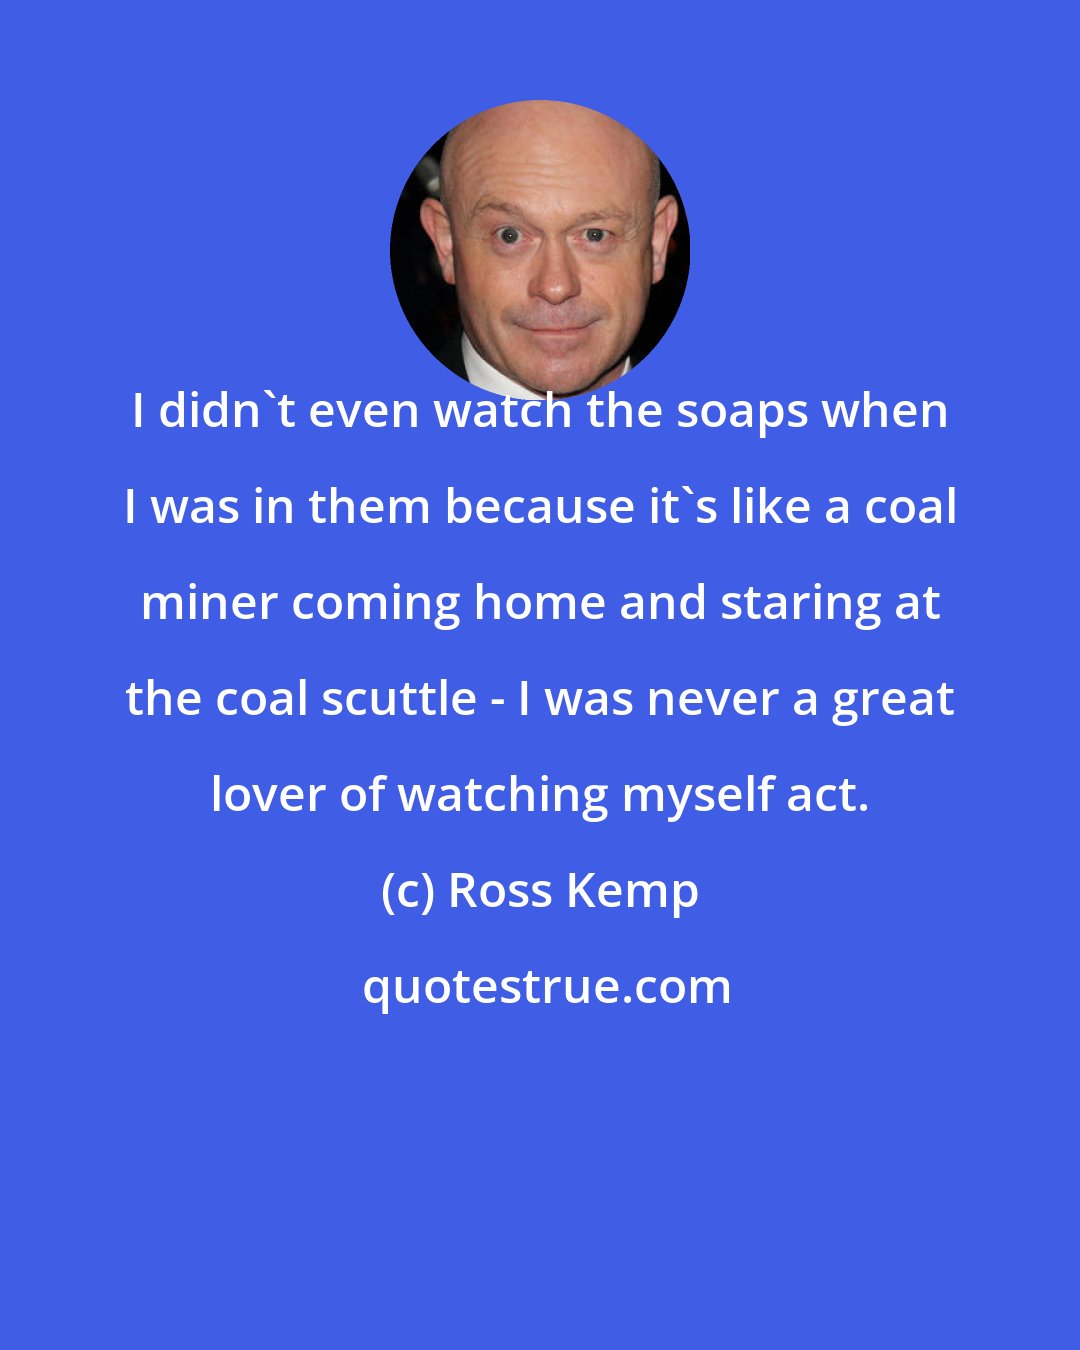 Ross Kemp: I didn't even watch the soaps when I was in them because it's like a coal miner coming home and staring at the coal scuttle - I was never a great lover of watching myself act.